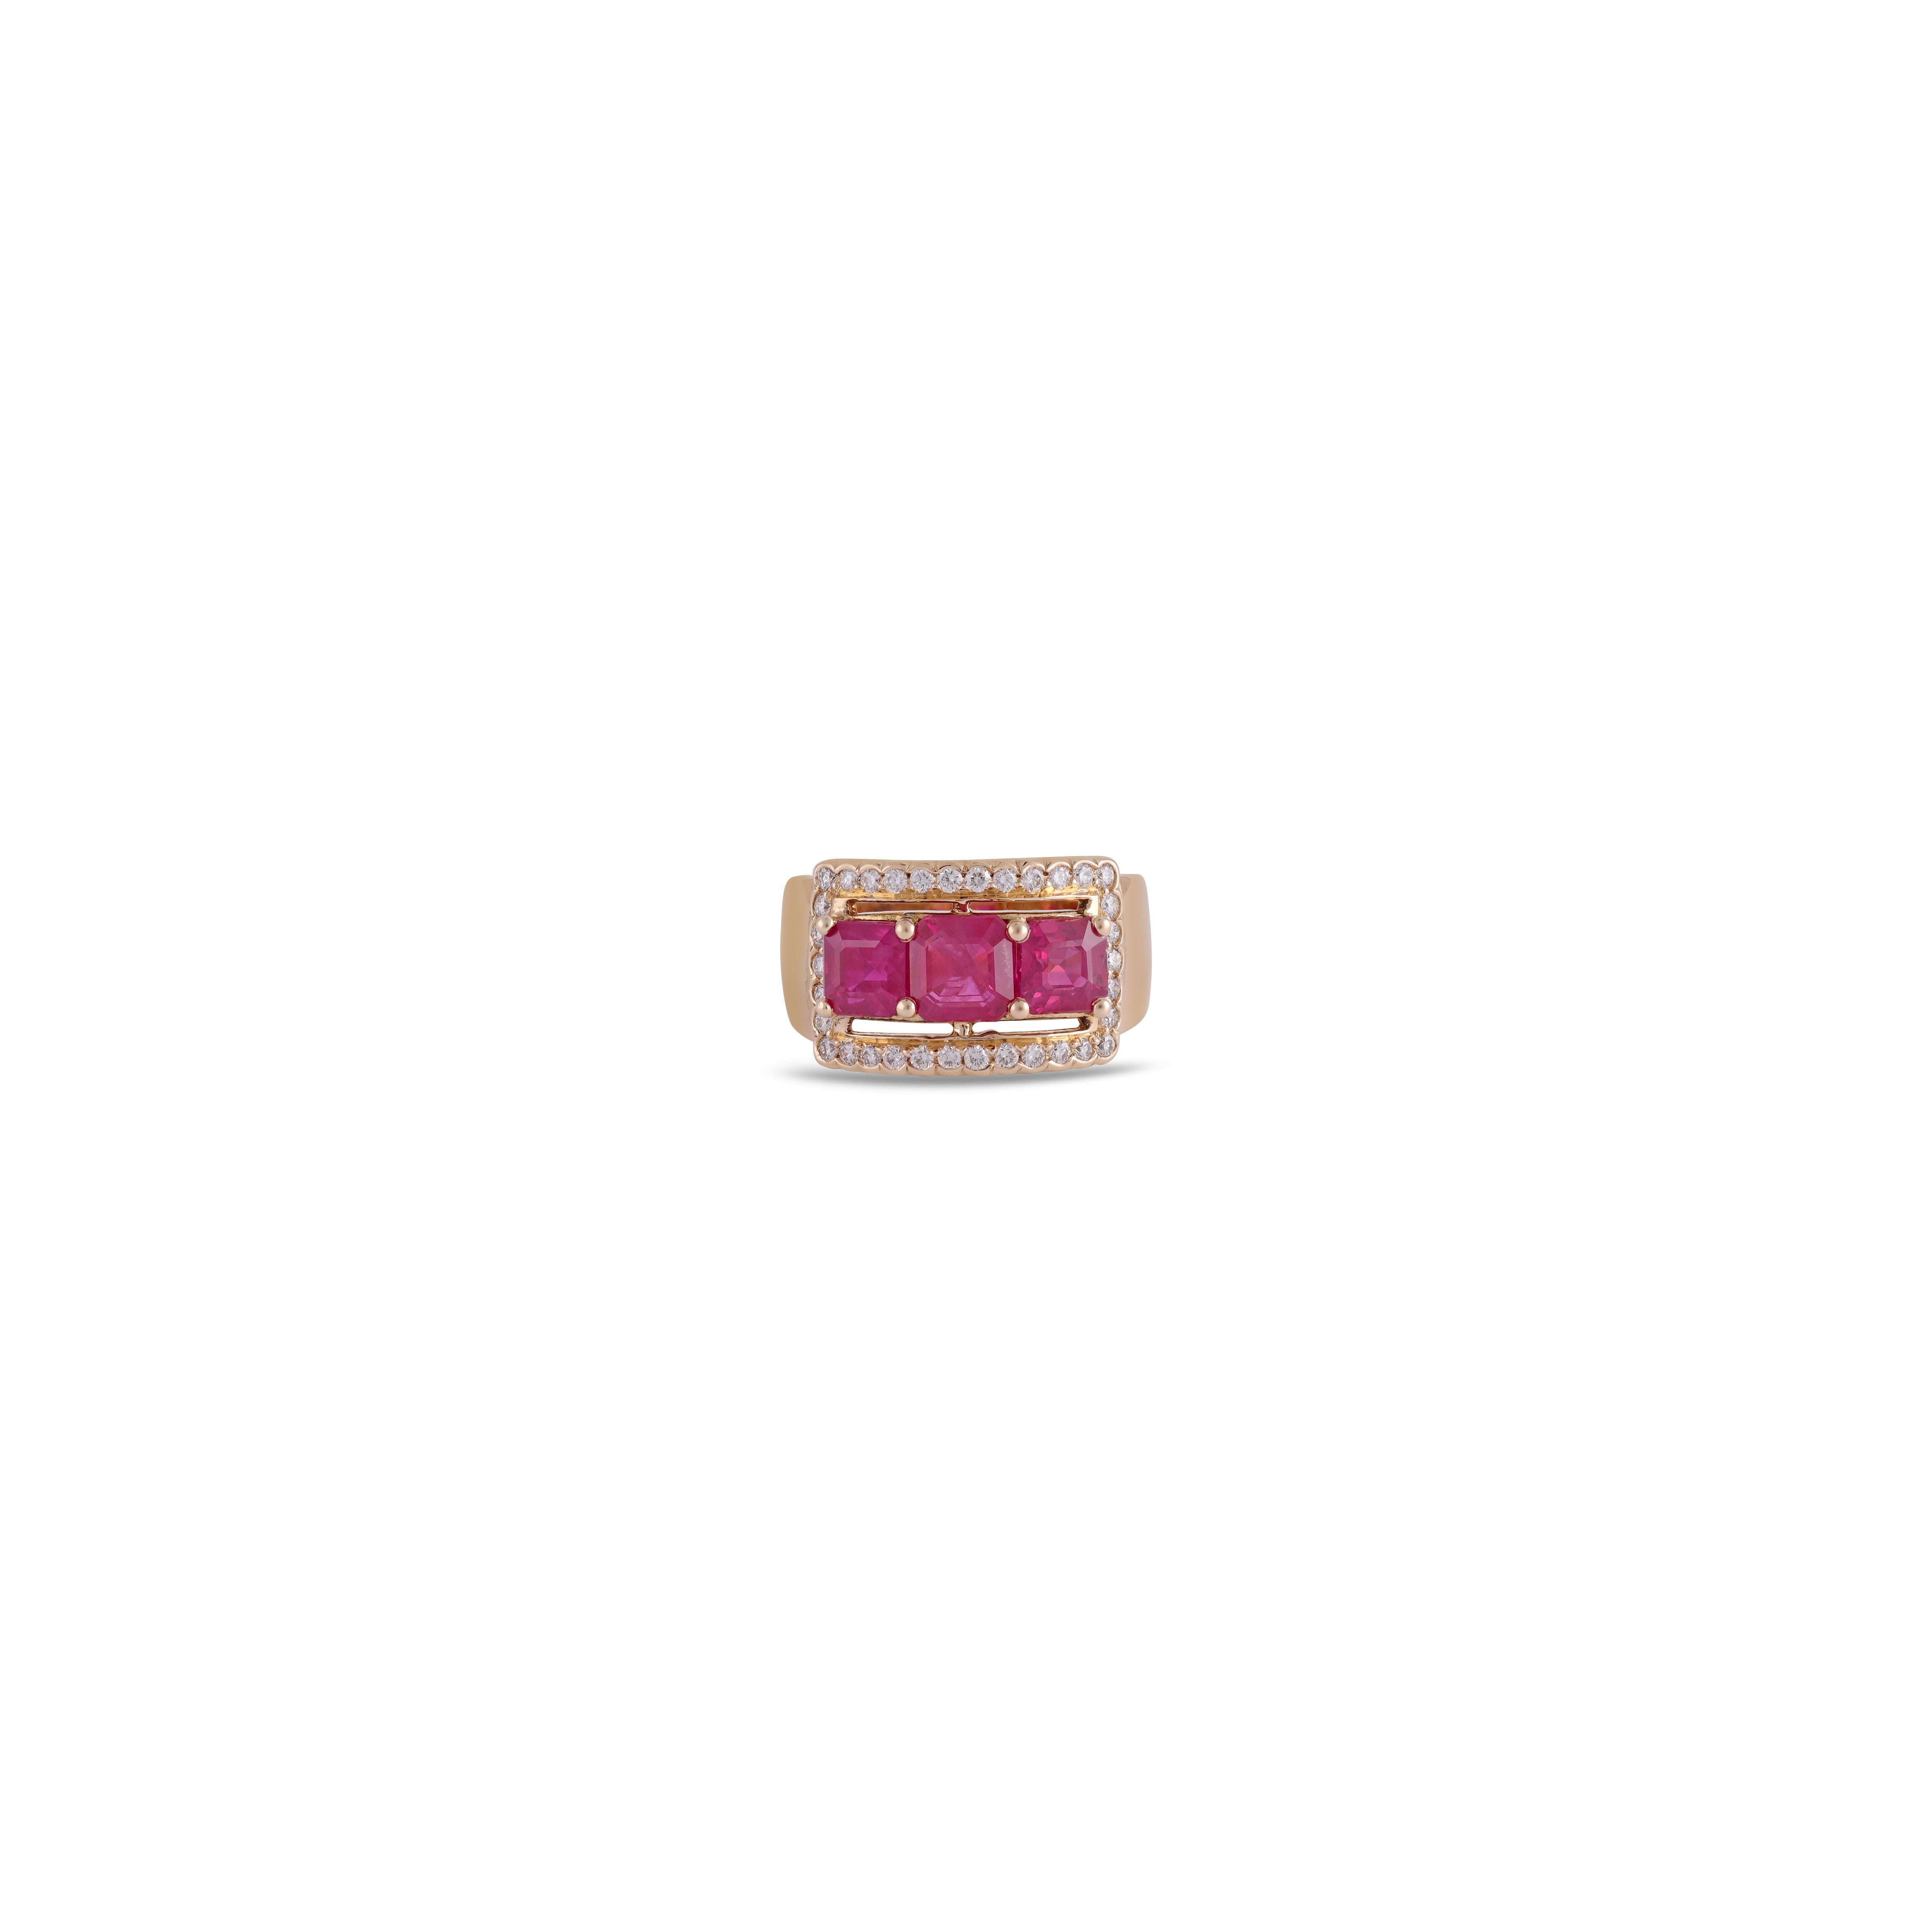 3 Stone Mozambique Ruby Cluster Wedding Ring 18k Gold

Product Details

→™ Jewelry Type - Rings
→™ Jewelry Main Material - 18K Gold, 18K Gold

Stone Details
→™ Primary Stone Type: Mozambique Ruby  
→™ Primary Stone Details: Oiled
→™ Primary Stone